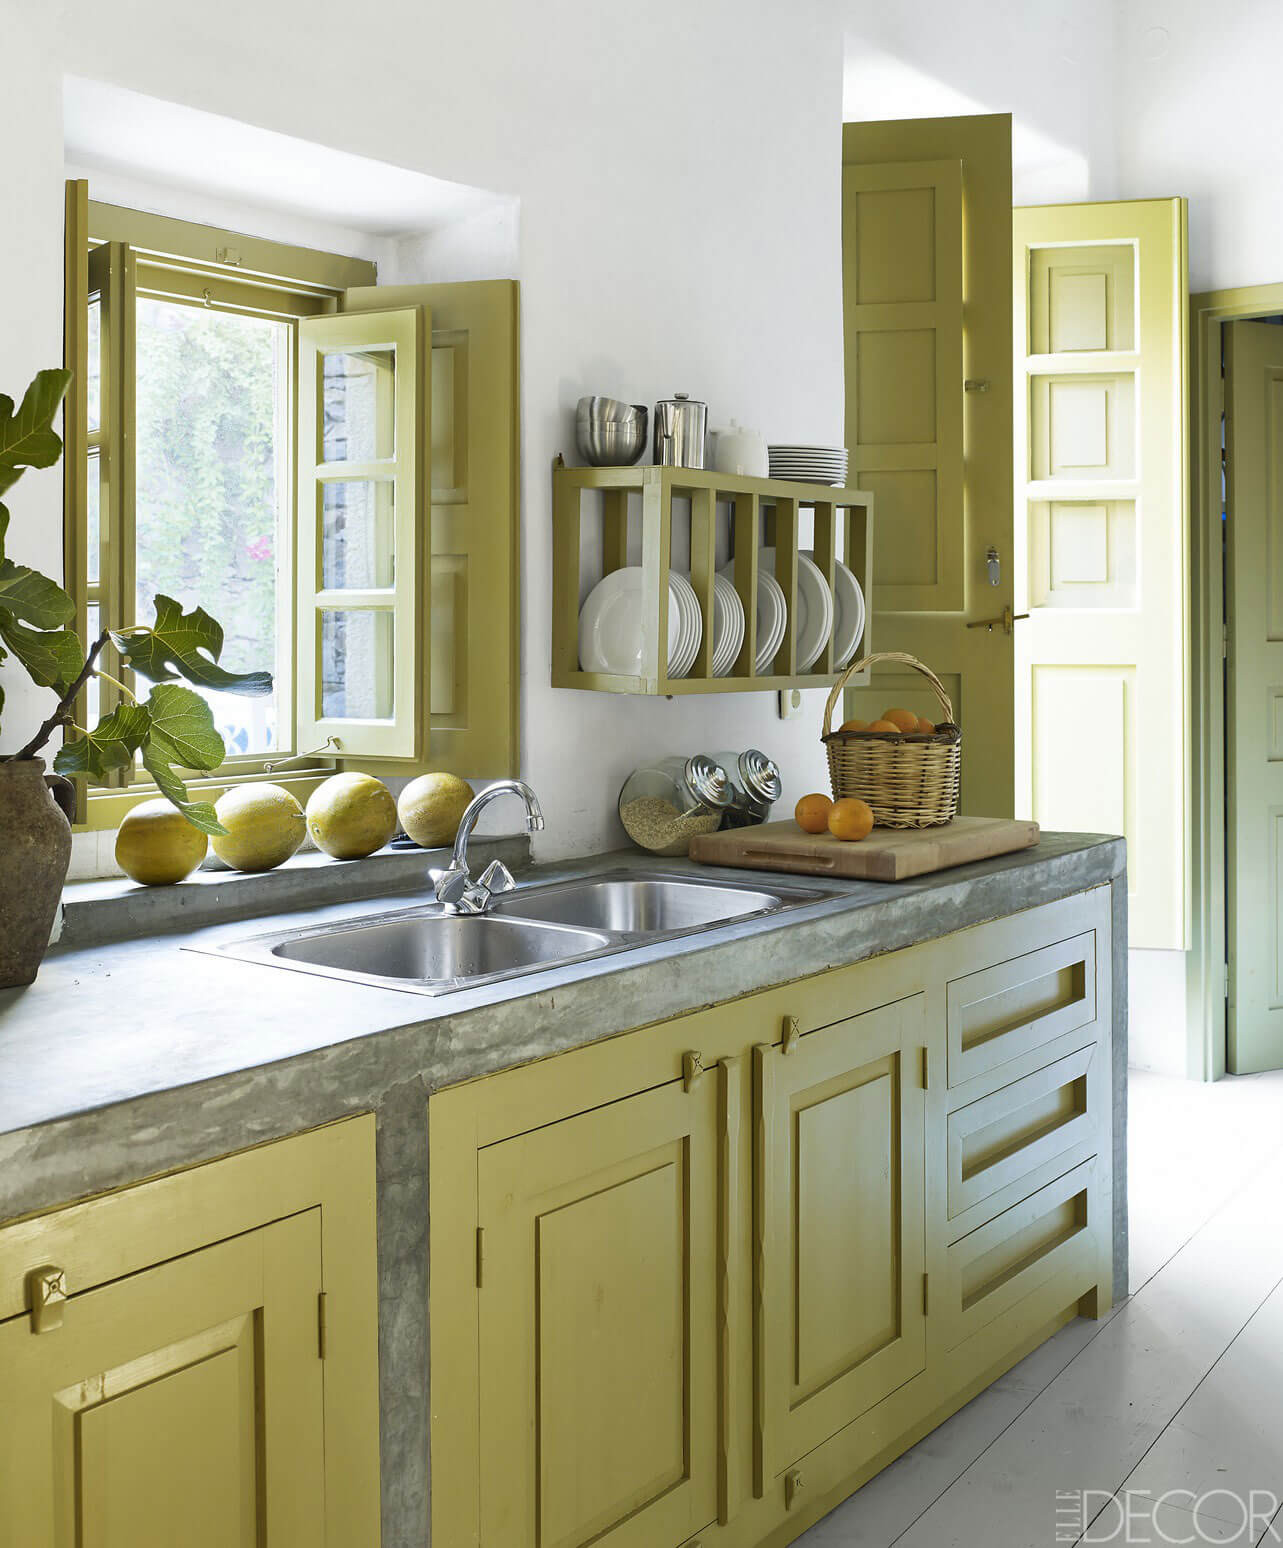 Small Kitchen Decorating Ideas
 20 Best Colors For Small Kitchen Design AllstateLogHomes